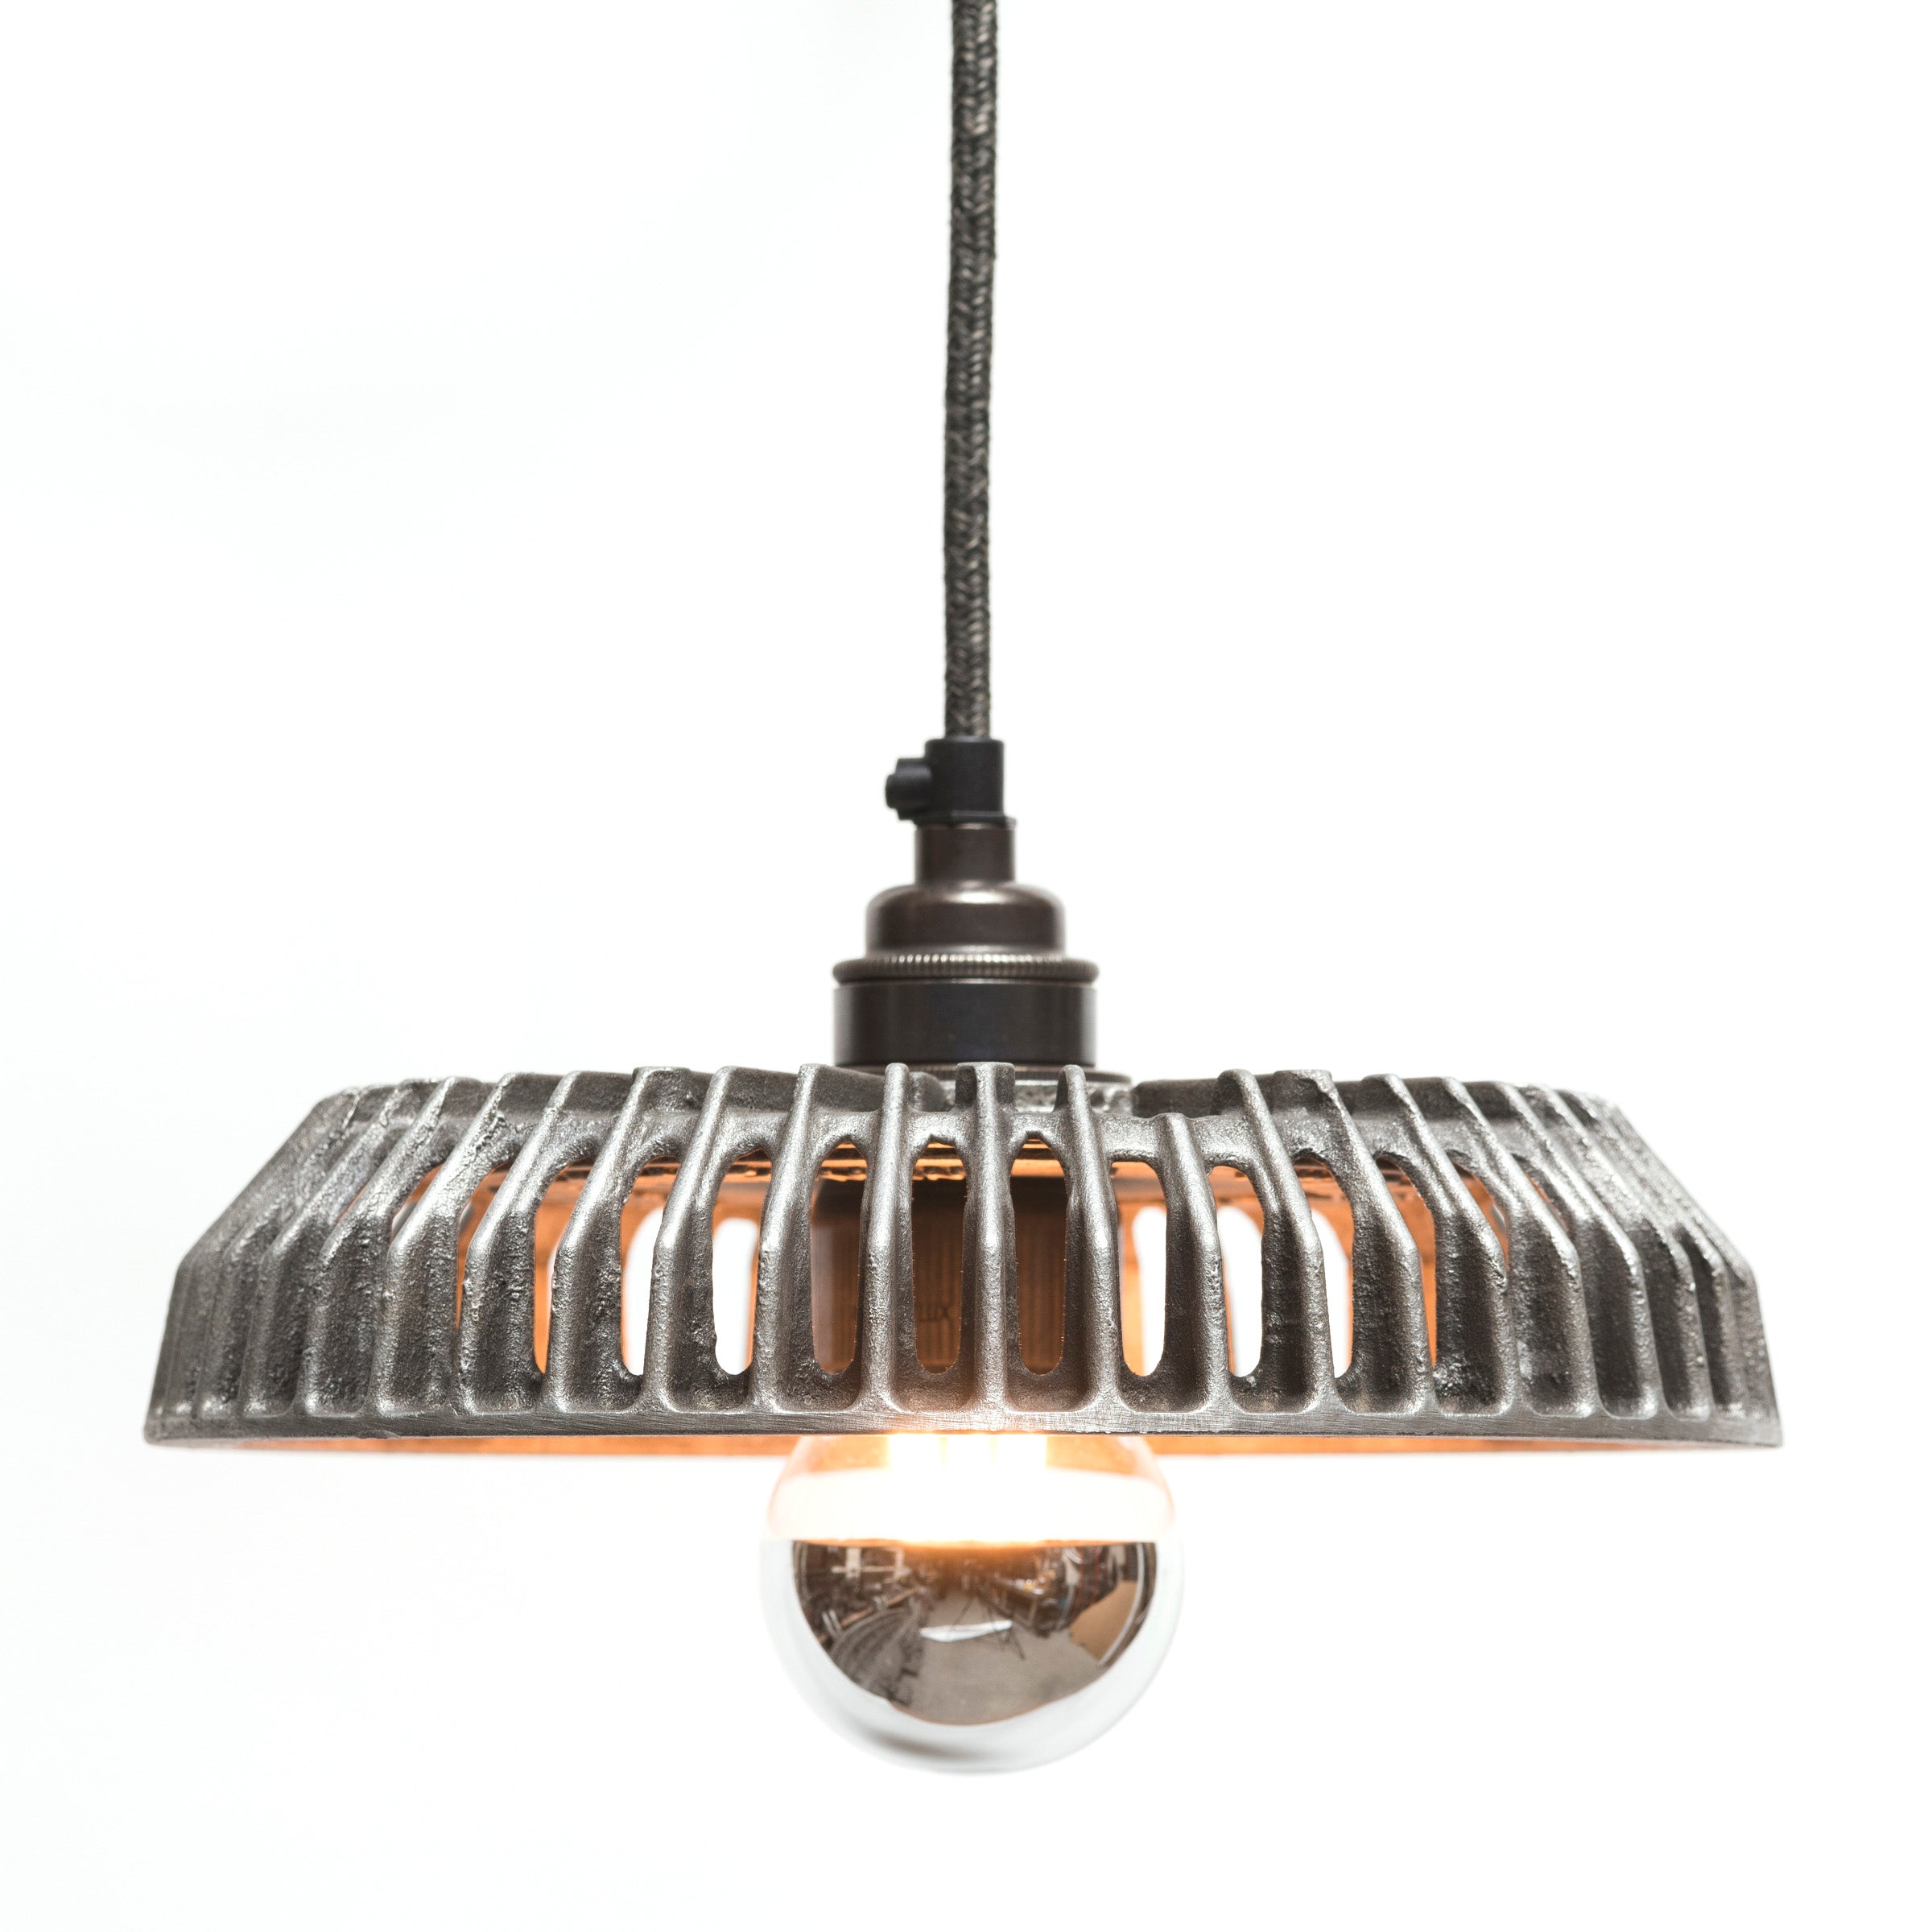 The Rag & Bone Man hand polished Pattern #2 Basket pendant lamp from Warehouse Home